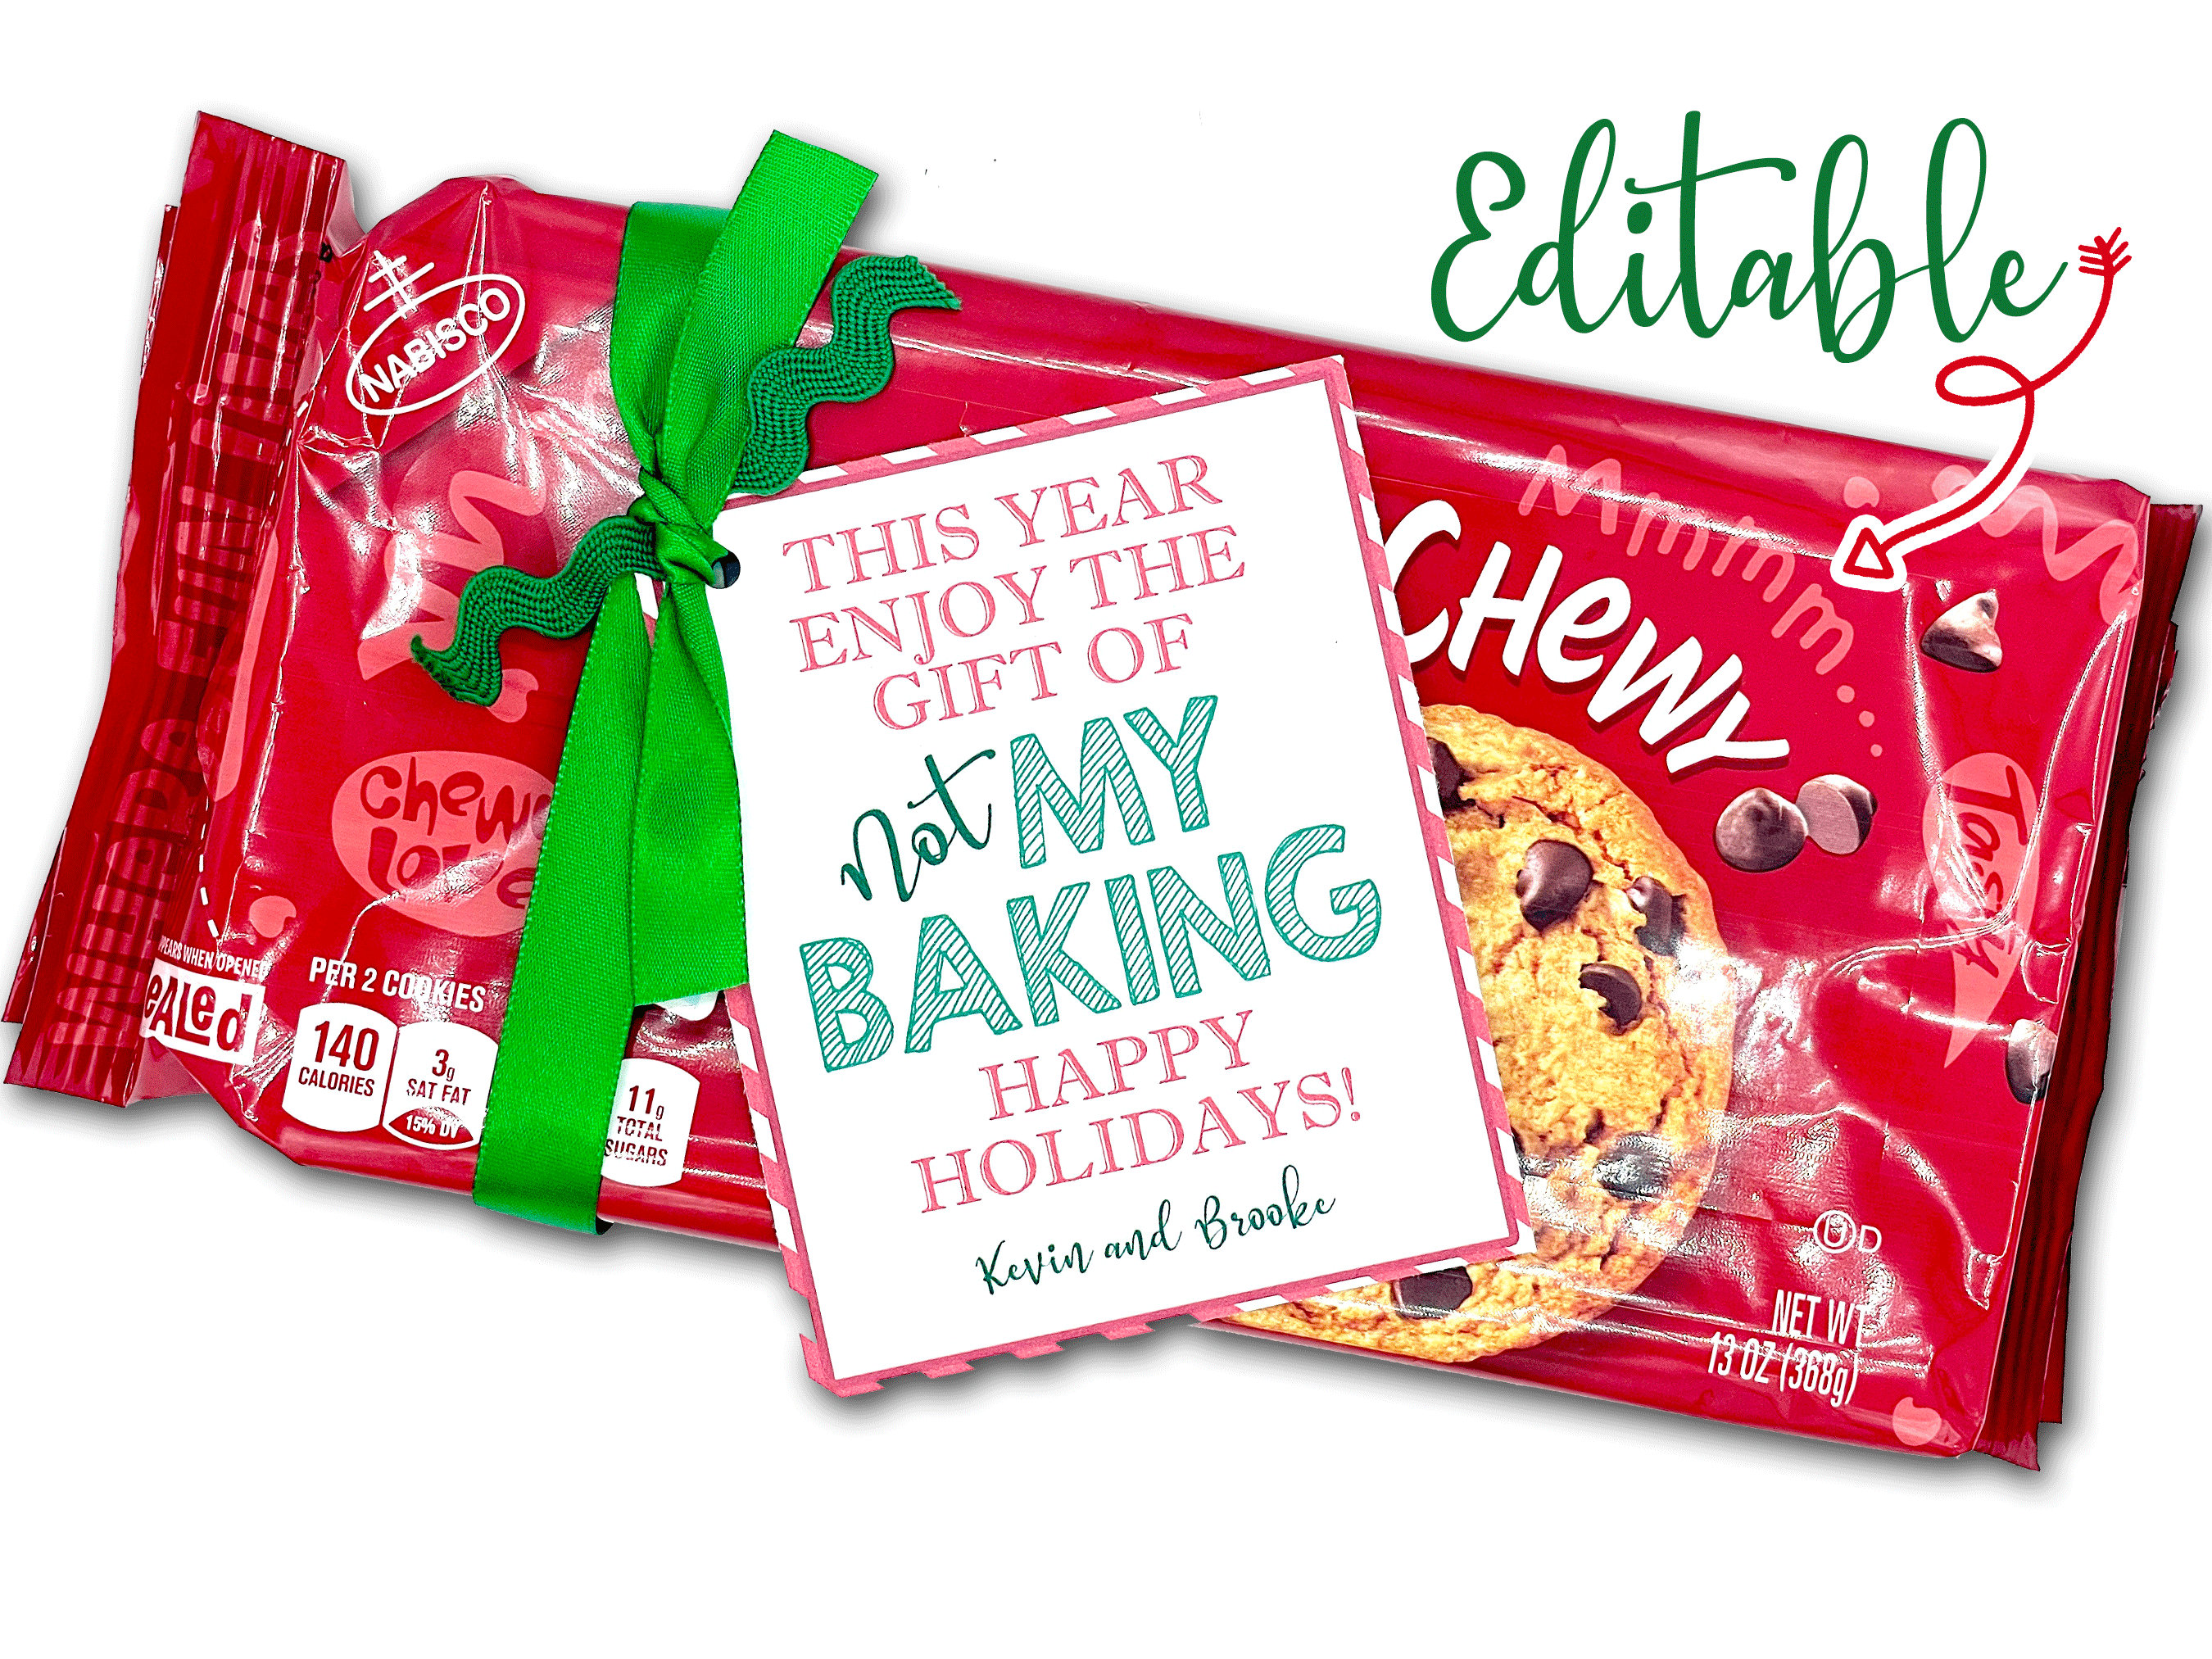 Easy Neighbor Gifts under $5 with Free Festive Gift Tags - Design Dazzle